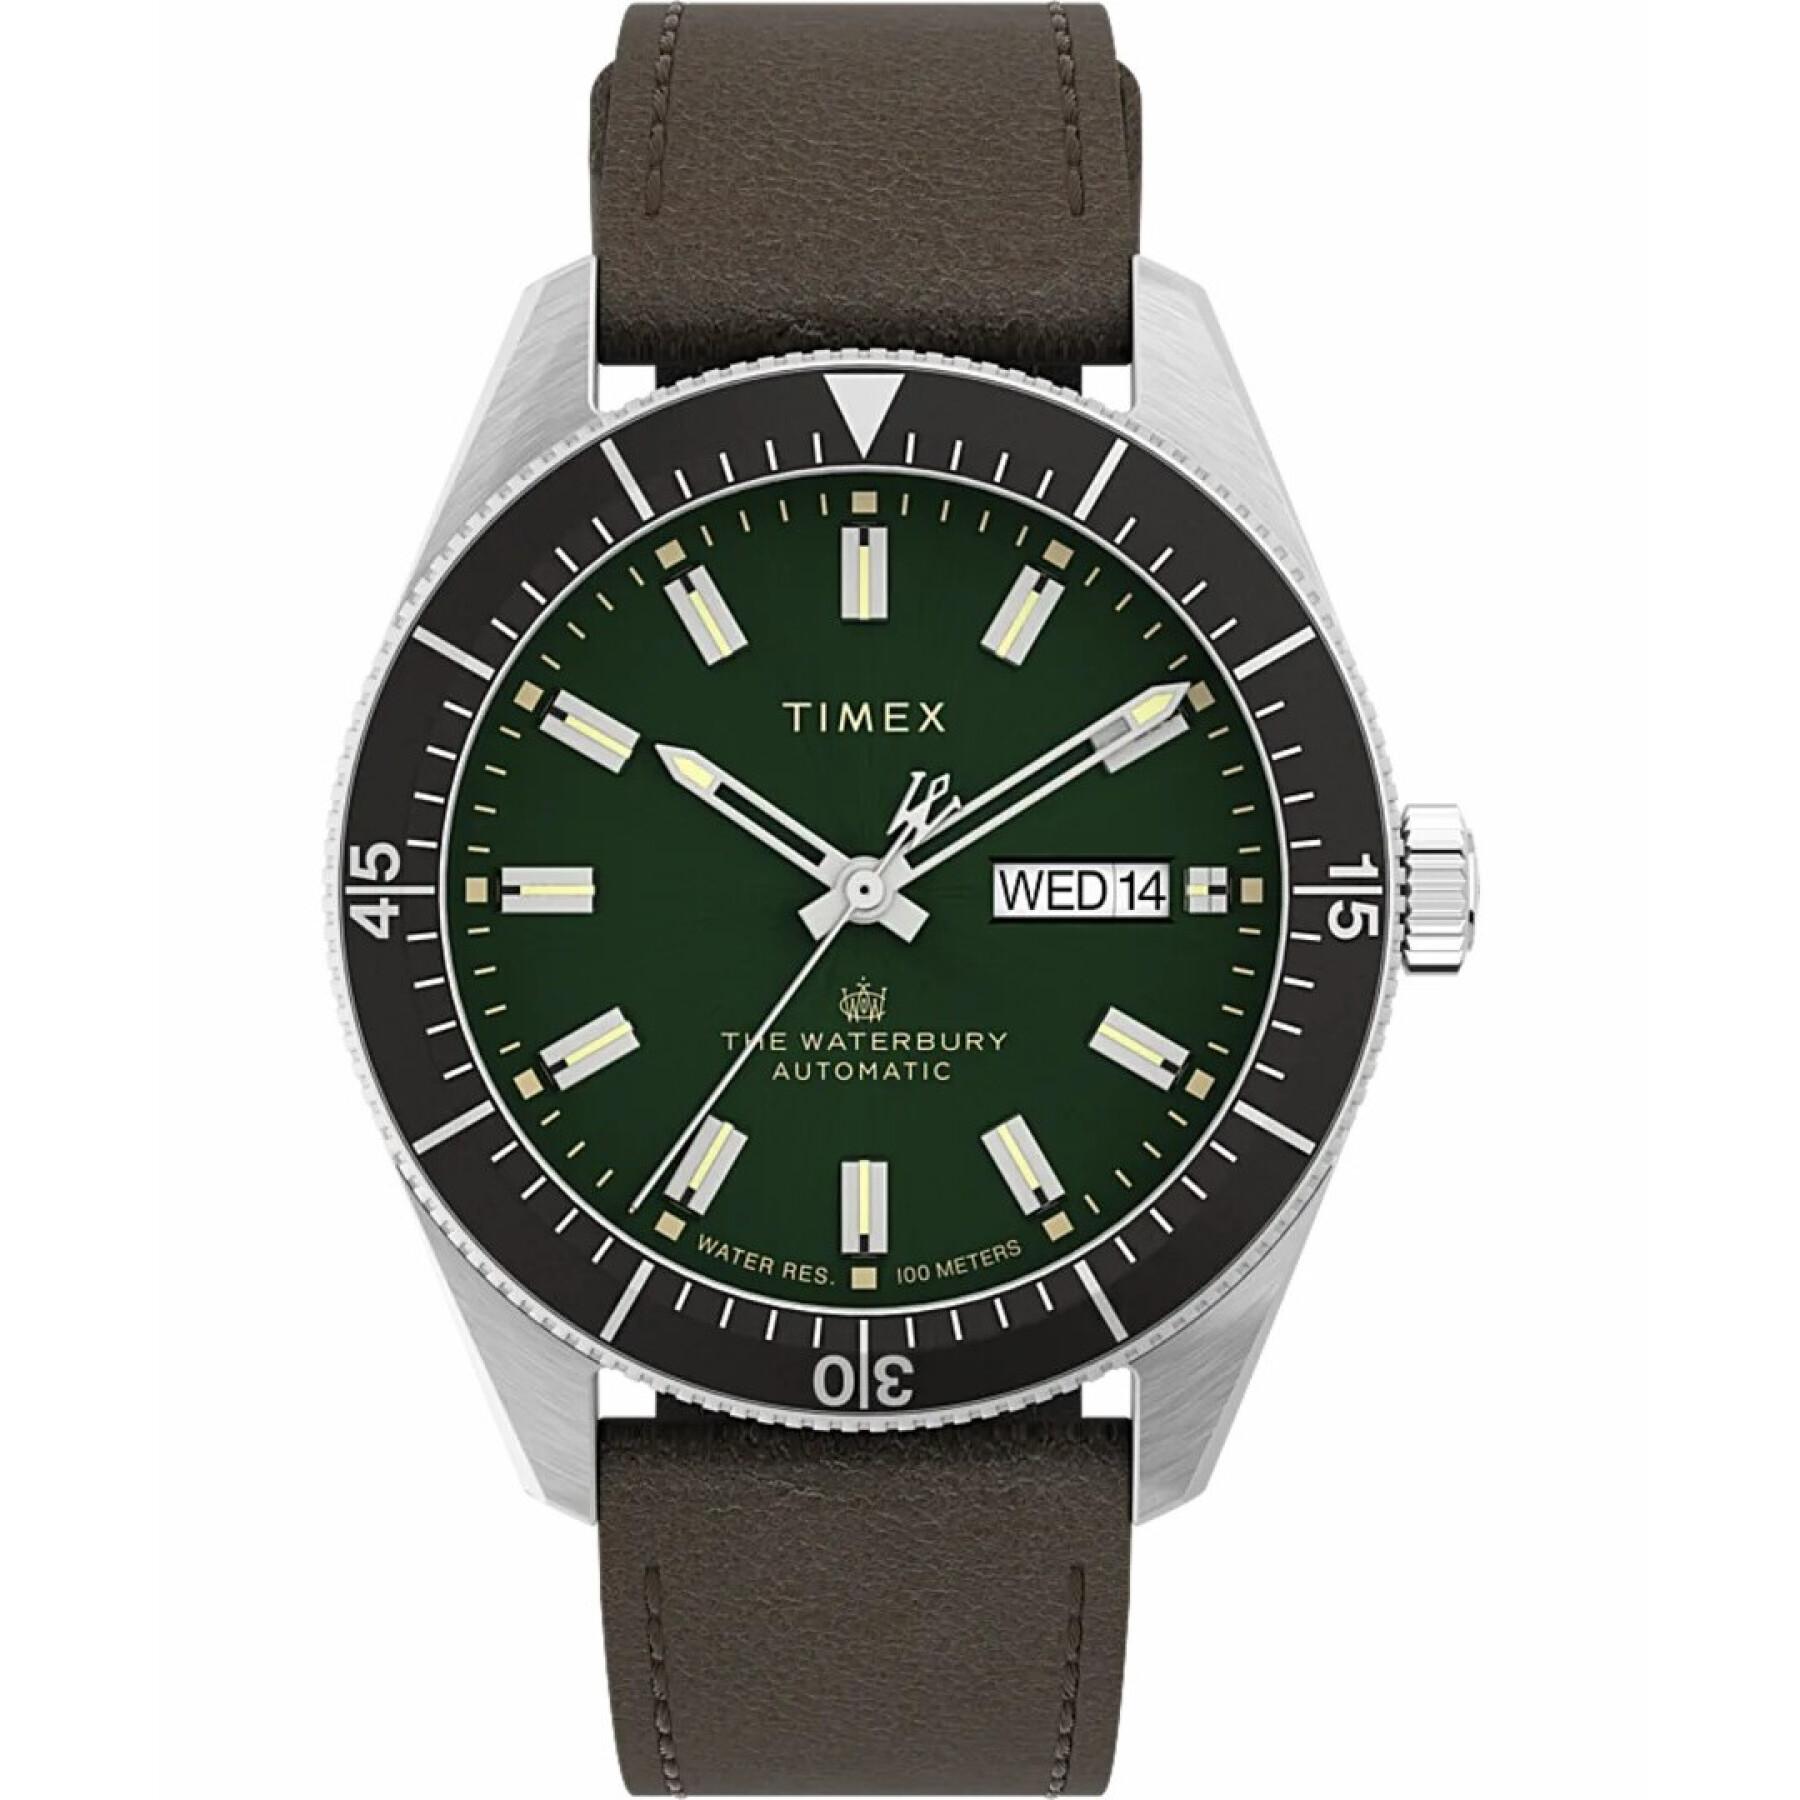 Ver Timex M79 Automatic